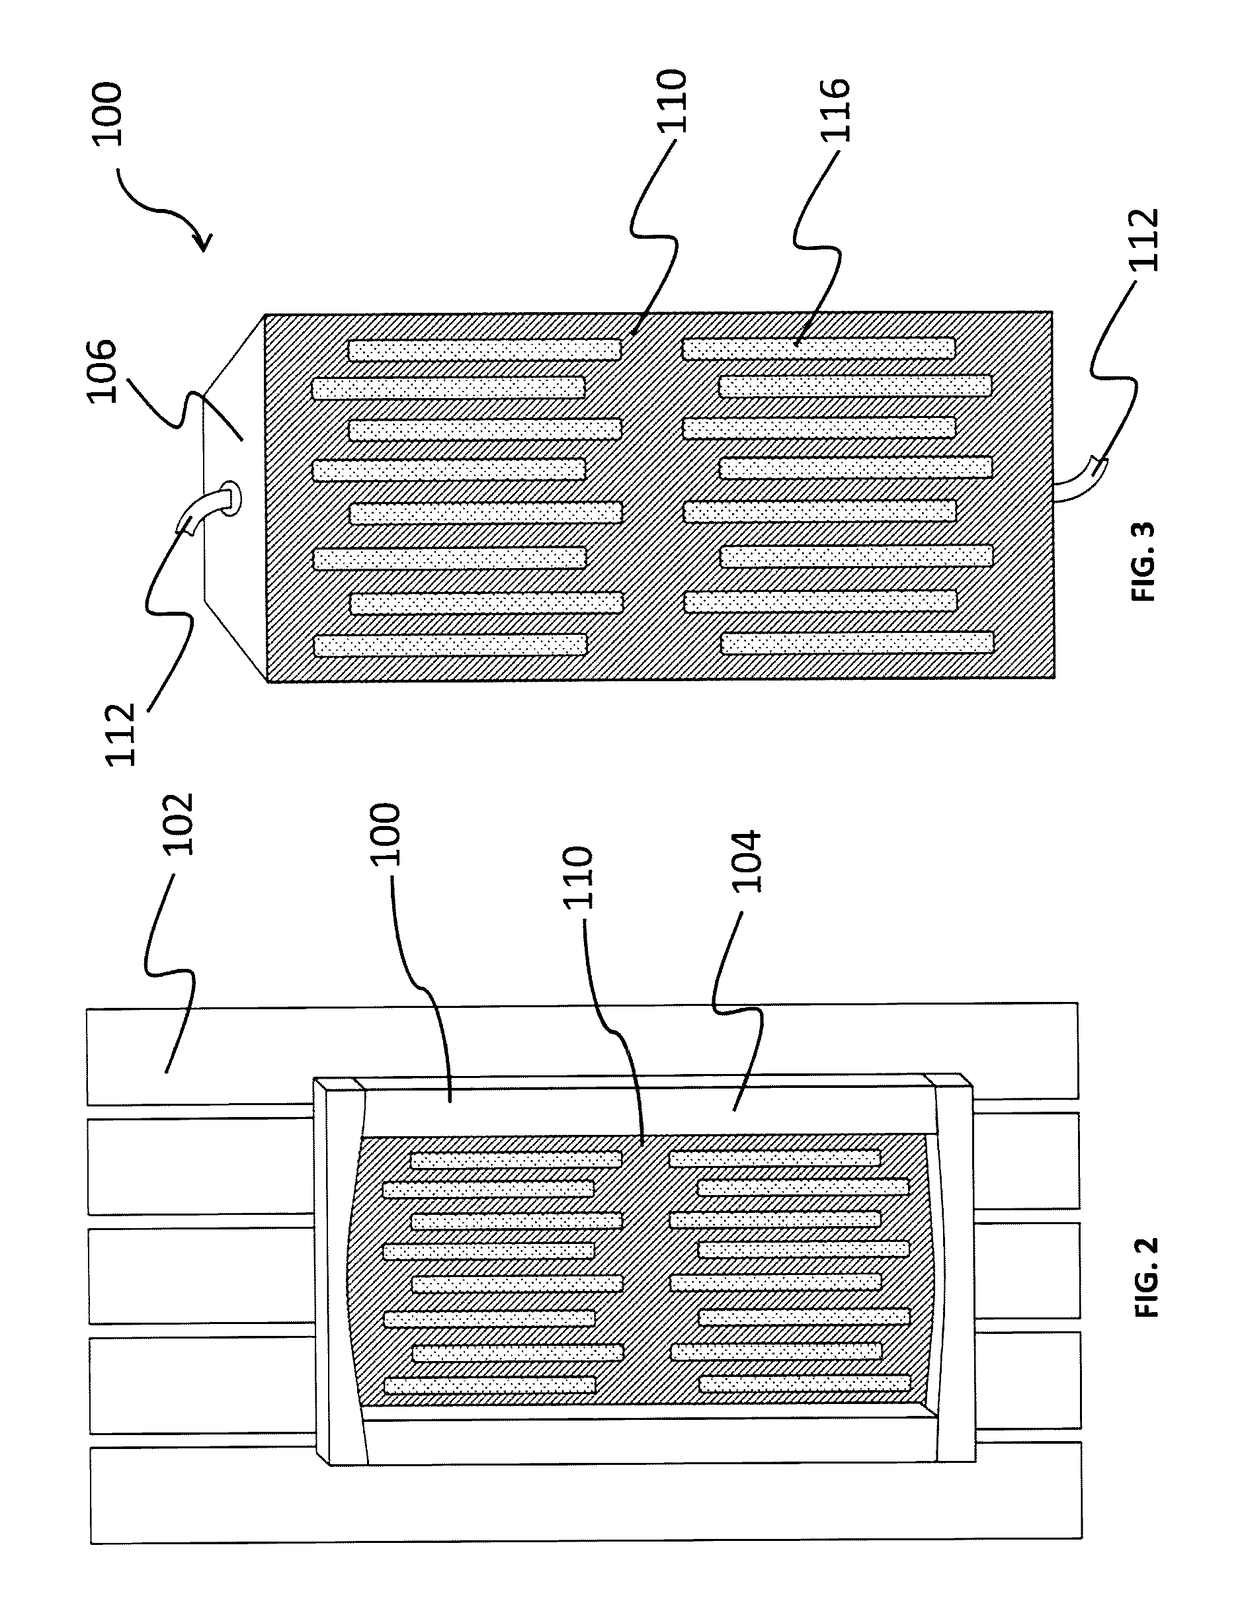 Exercise sauna having far infrared heating elements and configurable seating